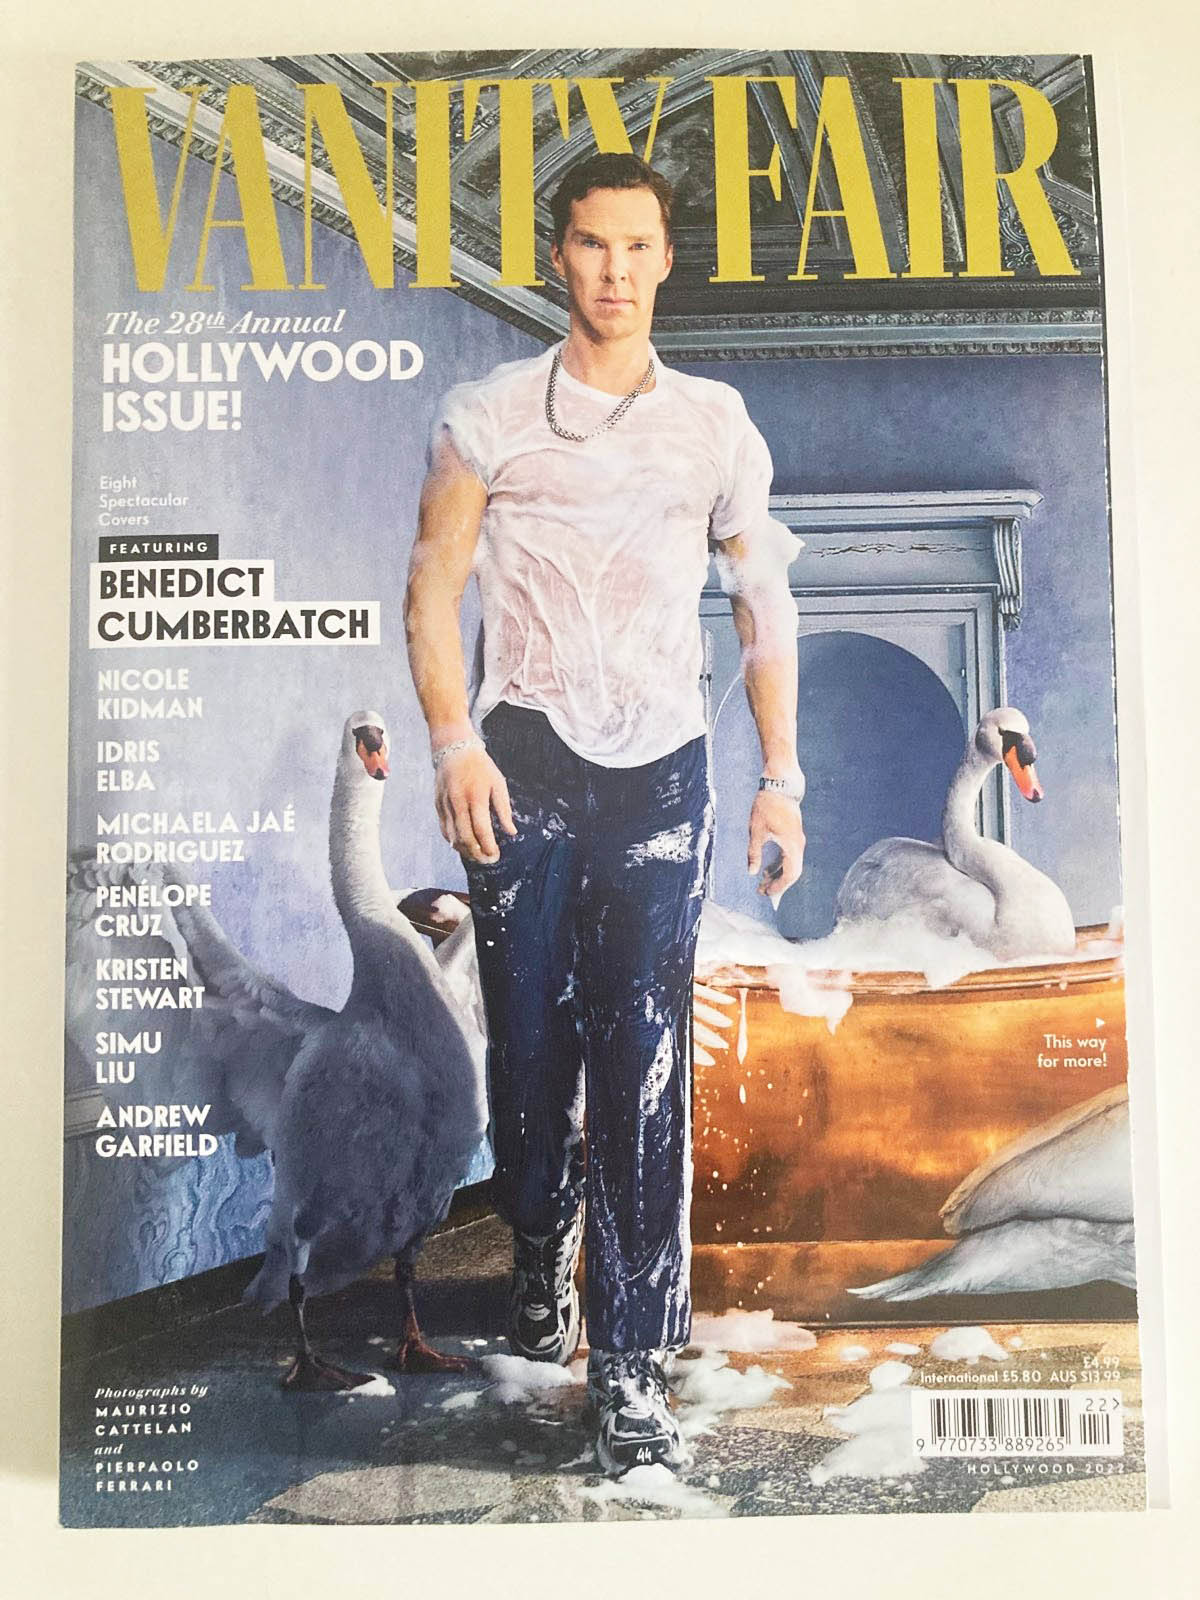 Benedict Cumberbatch The 28th Annual Hollywood Issue Vanity Fair